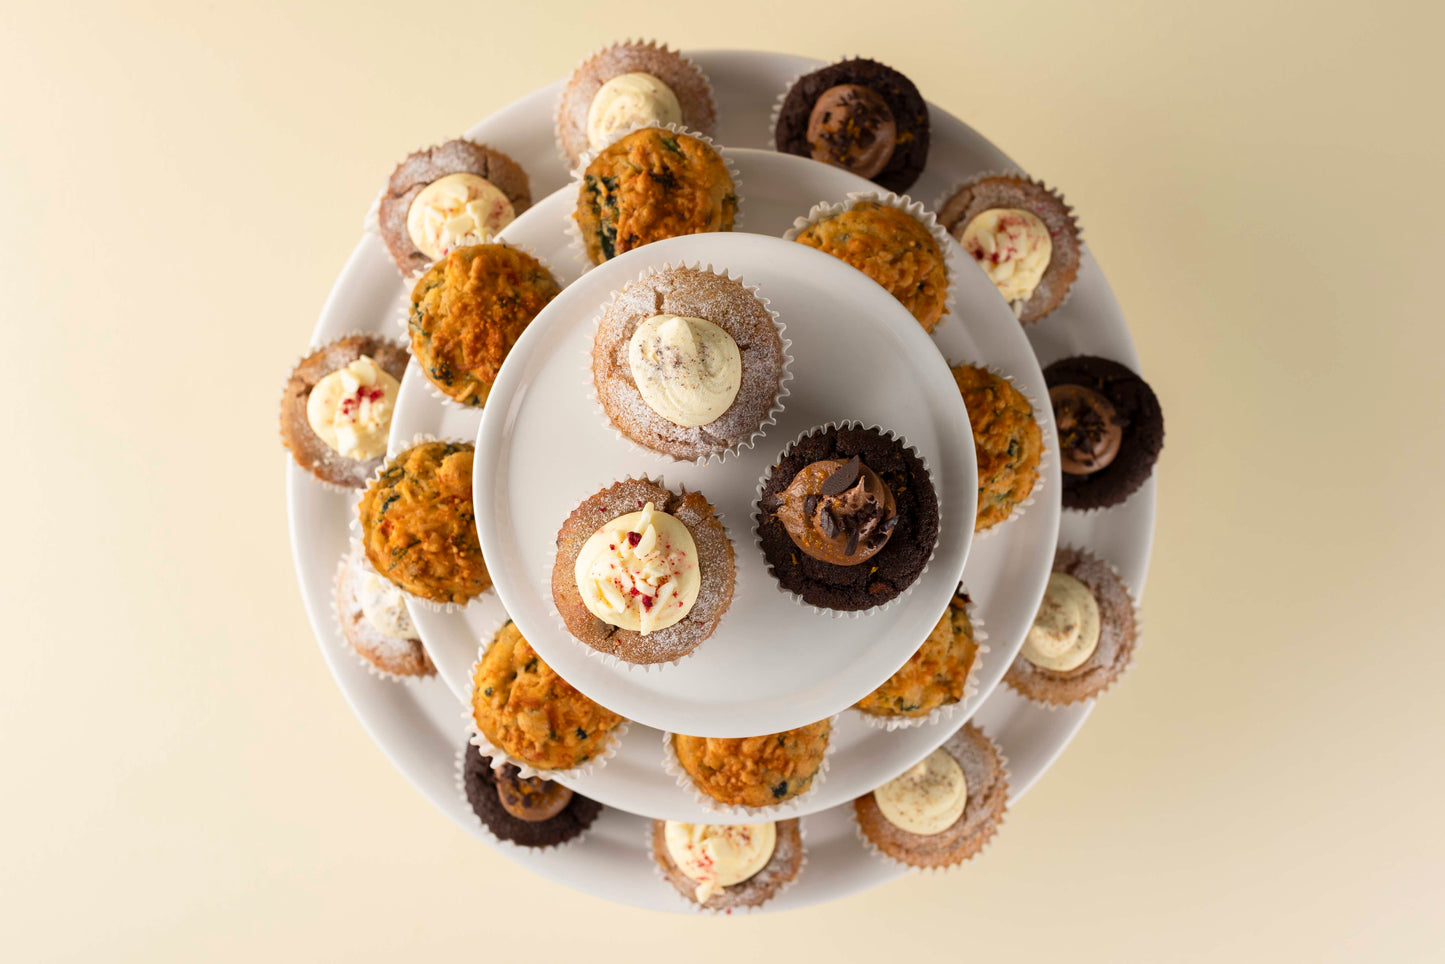 Meetings & Events Assortment - 12 Mixed Cupcakes & Savoury Muffins